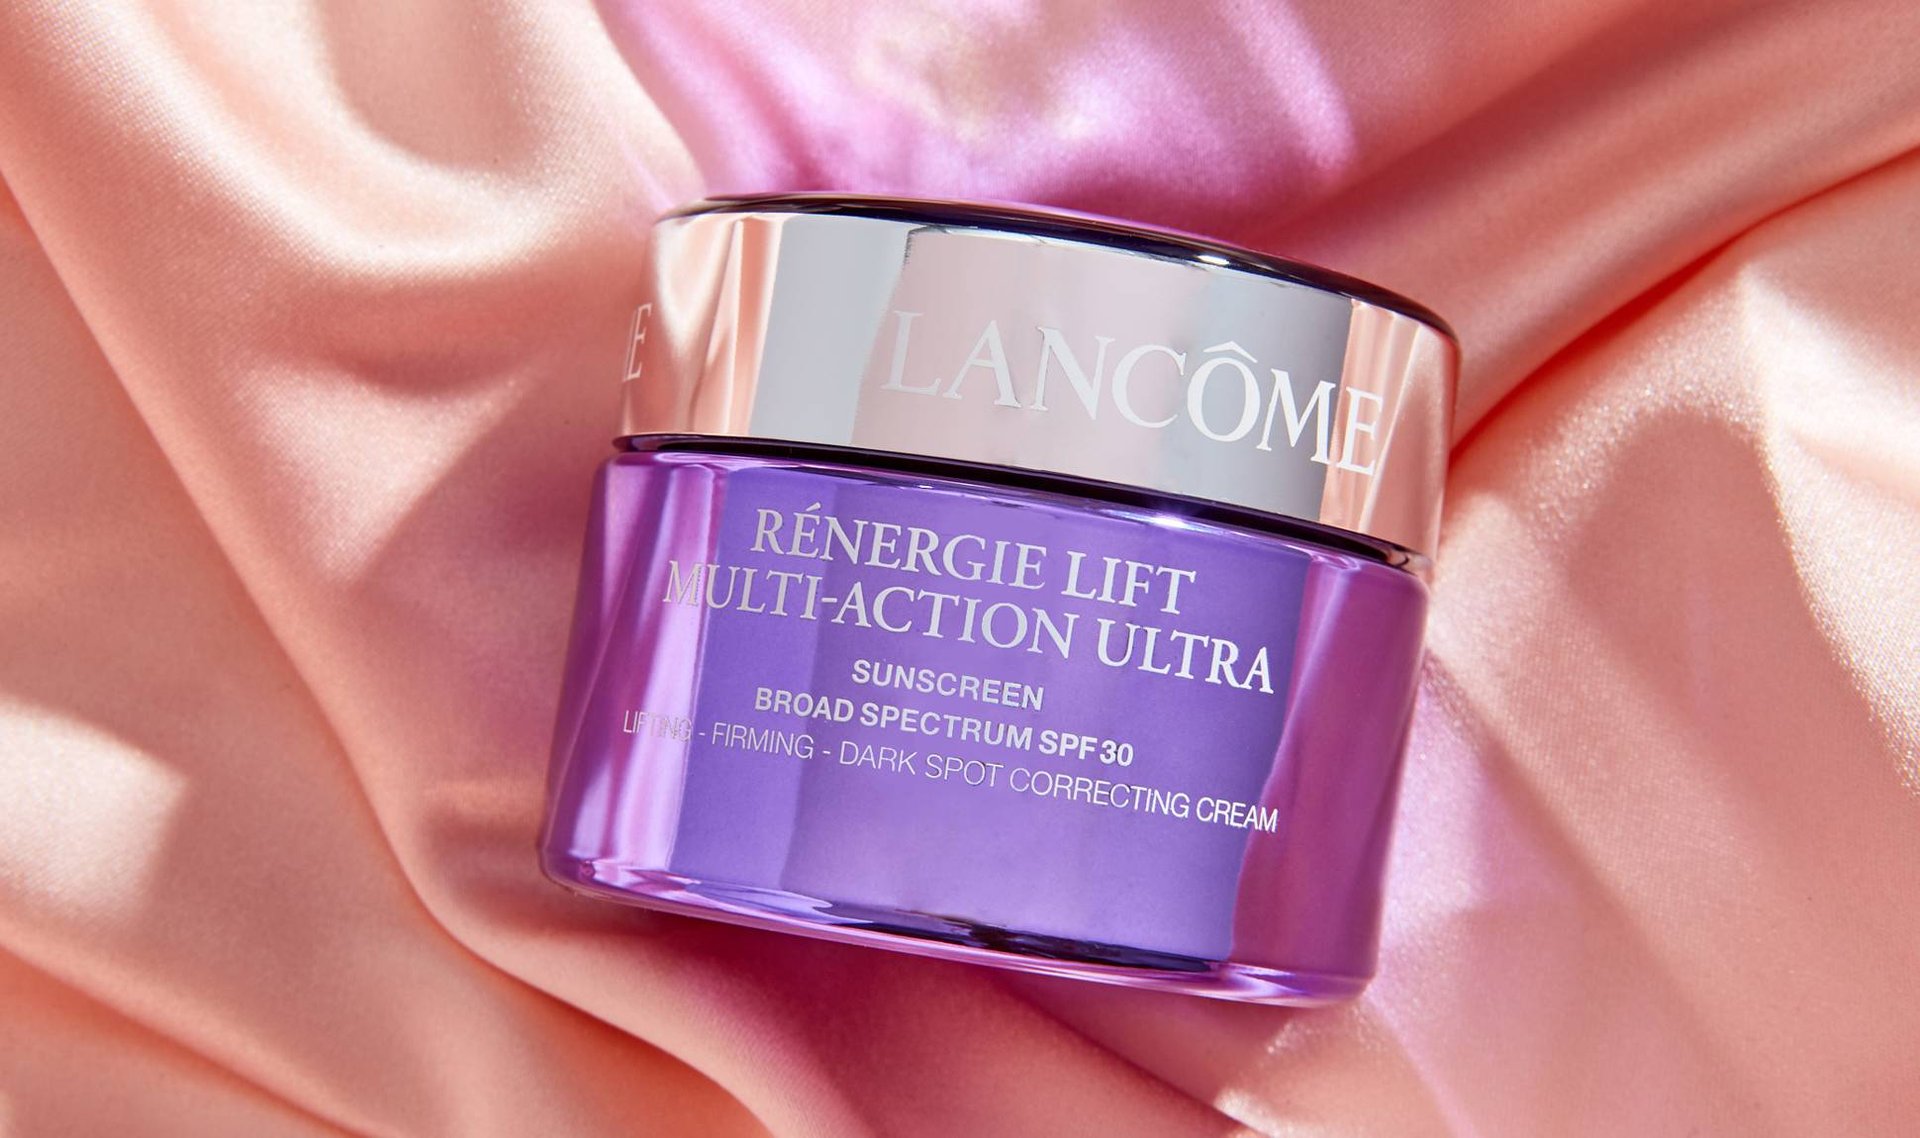 Correct and Prevent Dark Spots With the New Lancôme Rénergie Lift  Multi-Action Ultra Cream | Skincare.com